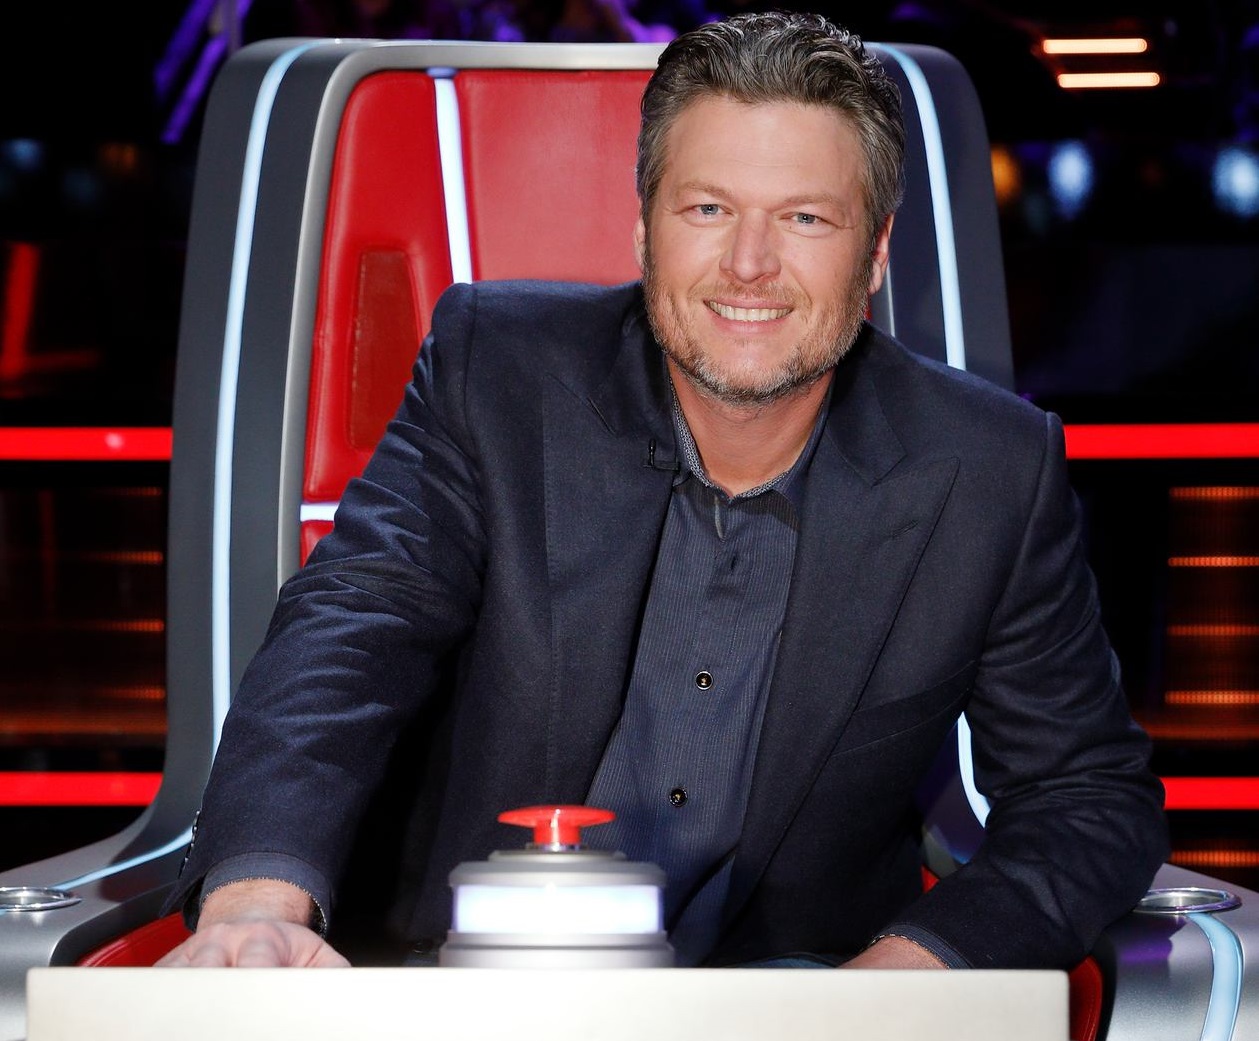 Blake Shelton Hints at When He Will Leave 'The Voice'